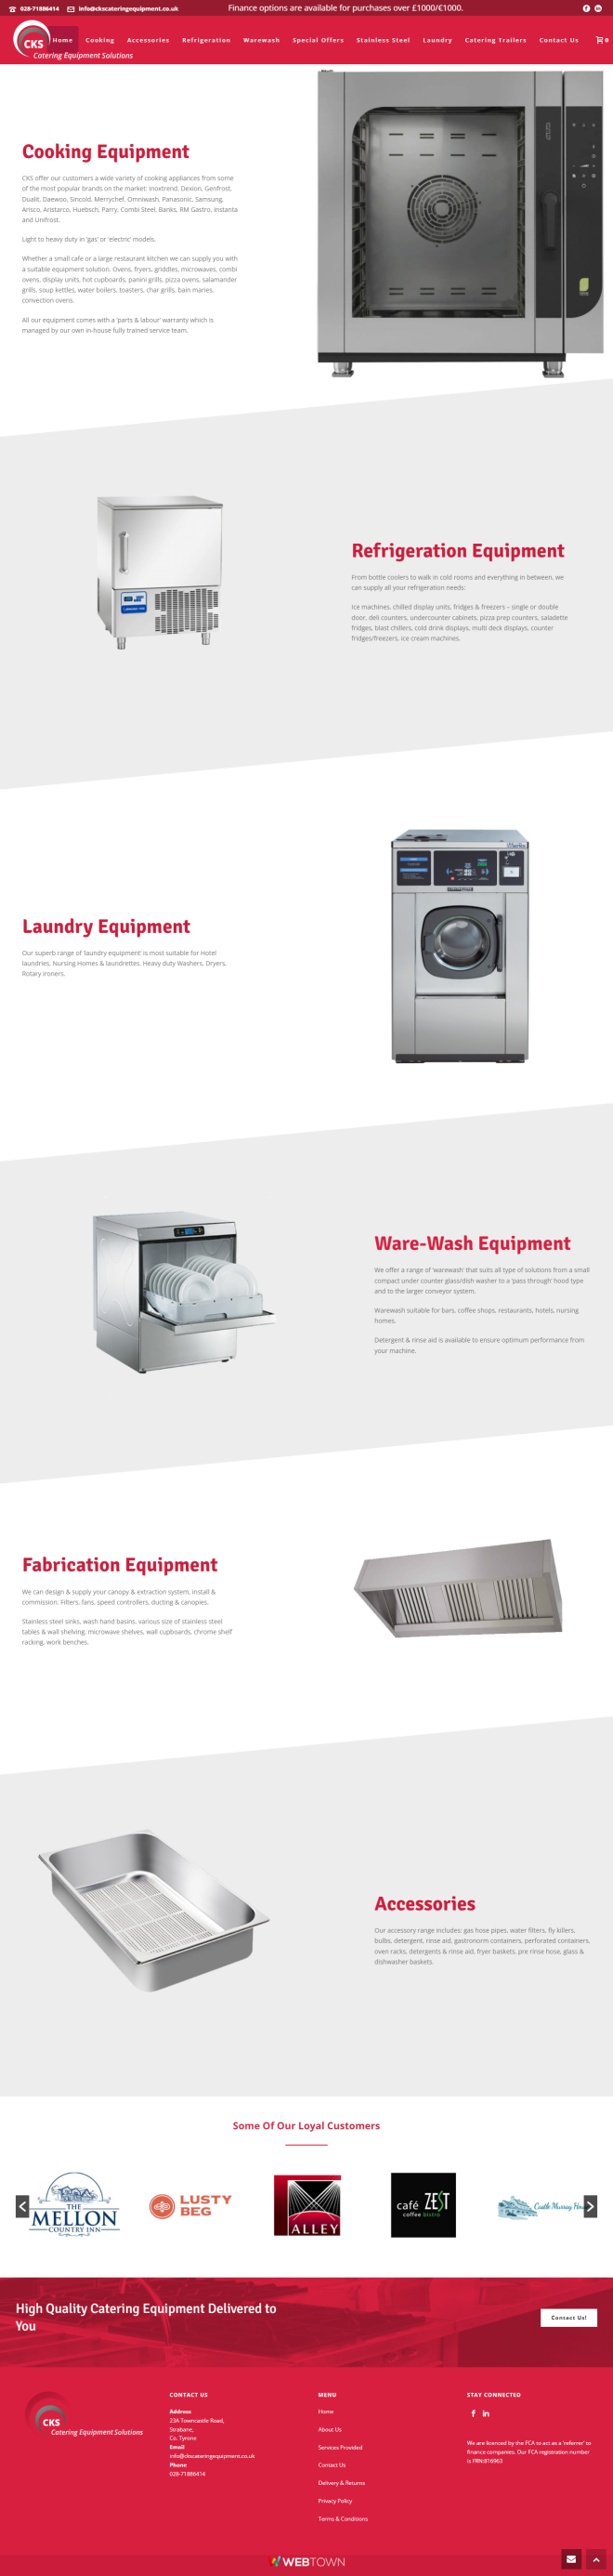 cks Catering Equipment Solutions (6)